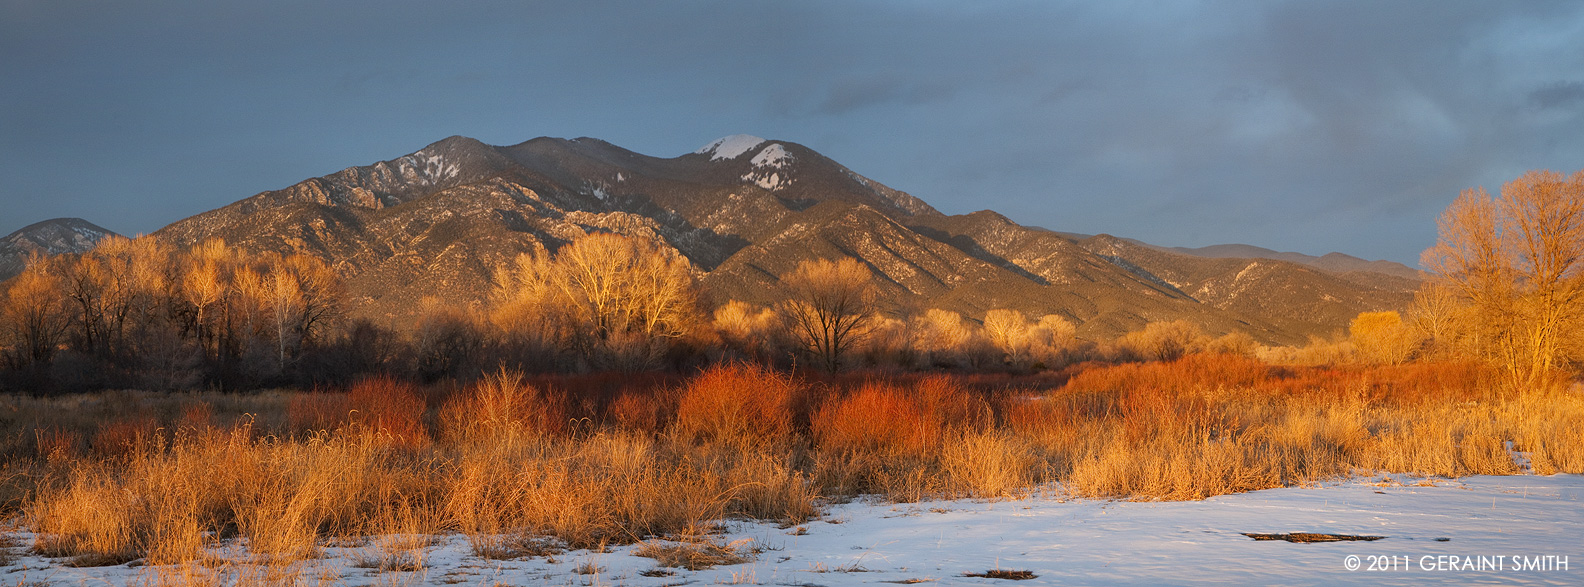 One of those winter evening moments in the high desert